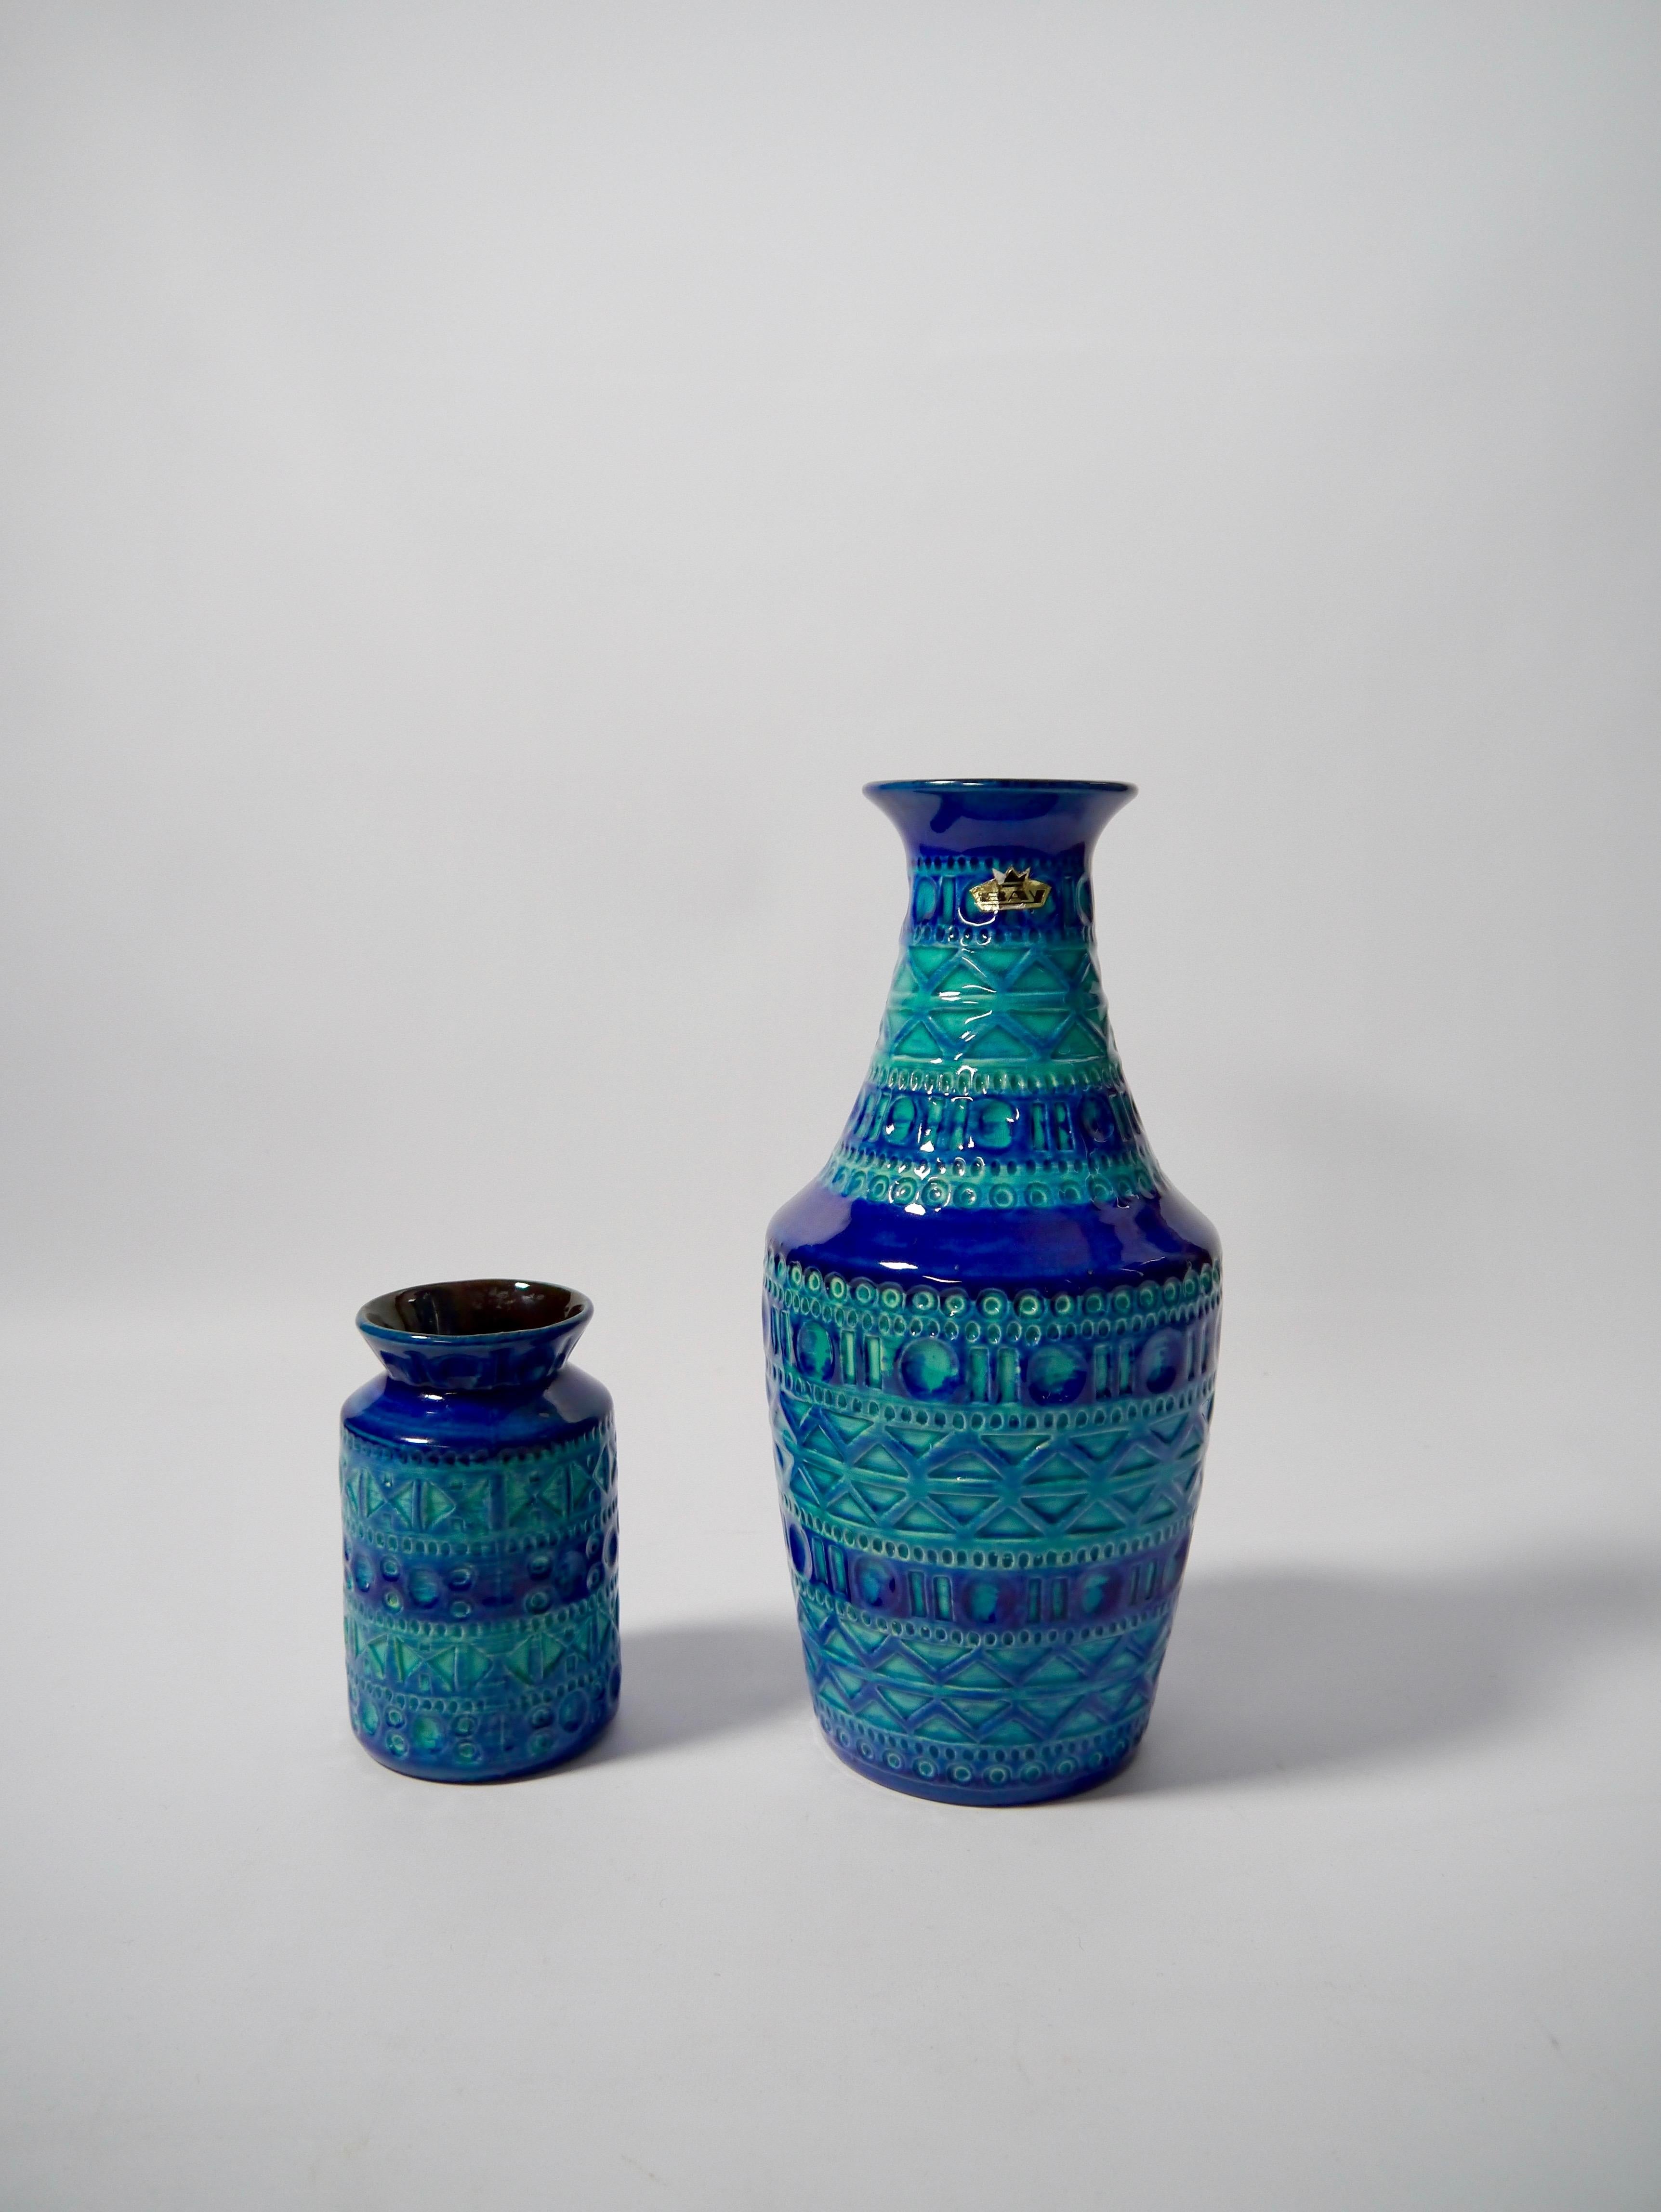 Pair of Mid-Century Modern glazed ceramic vases designed by Bodo Mans for BAY Keramik, West Germany 1960s. Decorative geometric pattern and vibrant shades of turquoise and blue, reminding of Bitossi's 